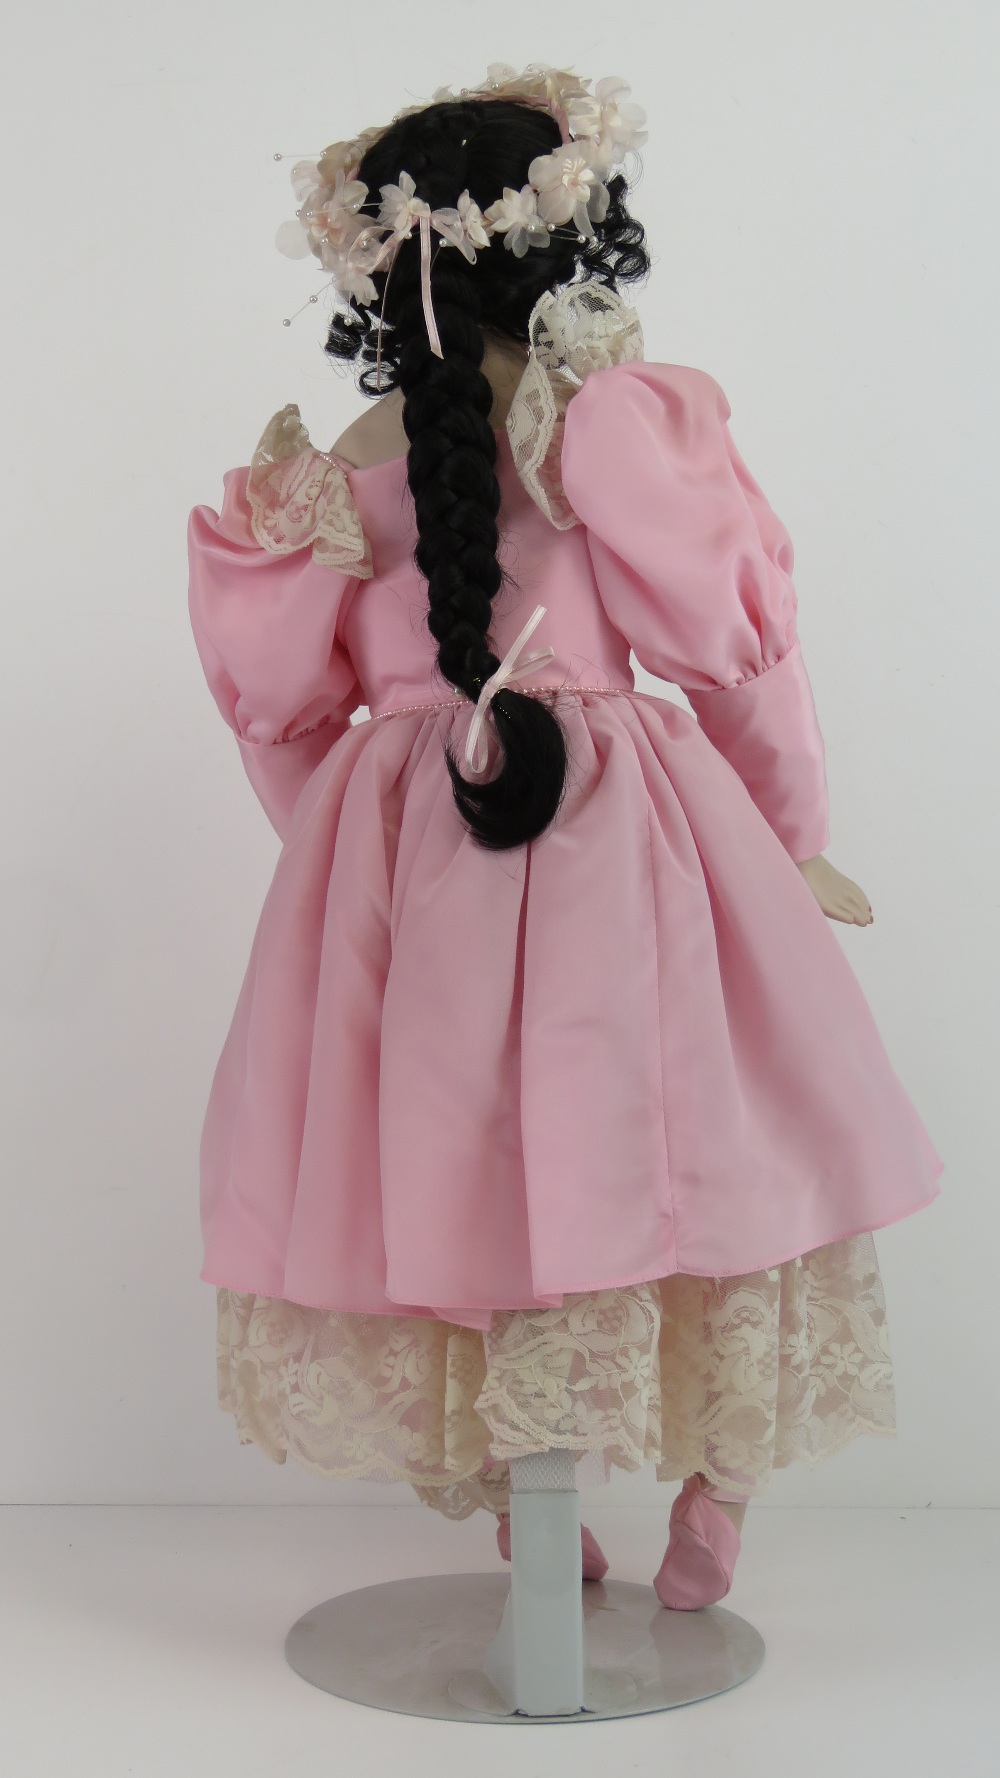 A handmade 20th century bisque headed doll made using an antique doll mould, - Image 6 of 6